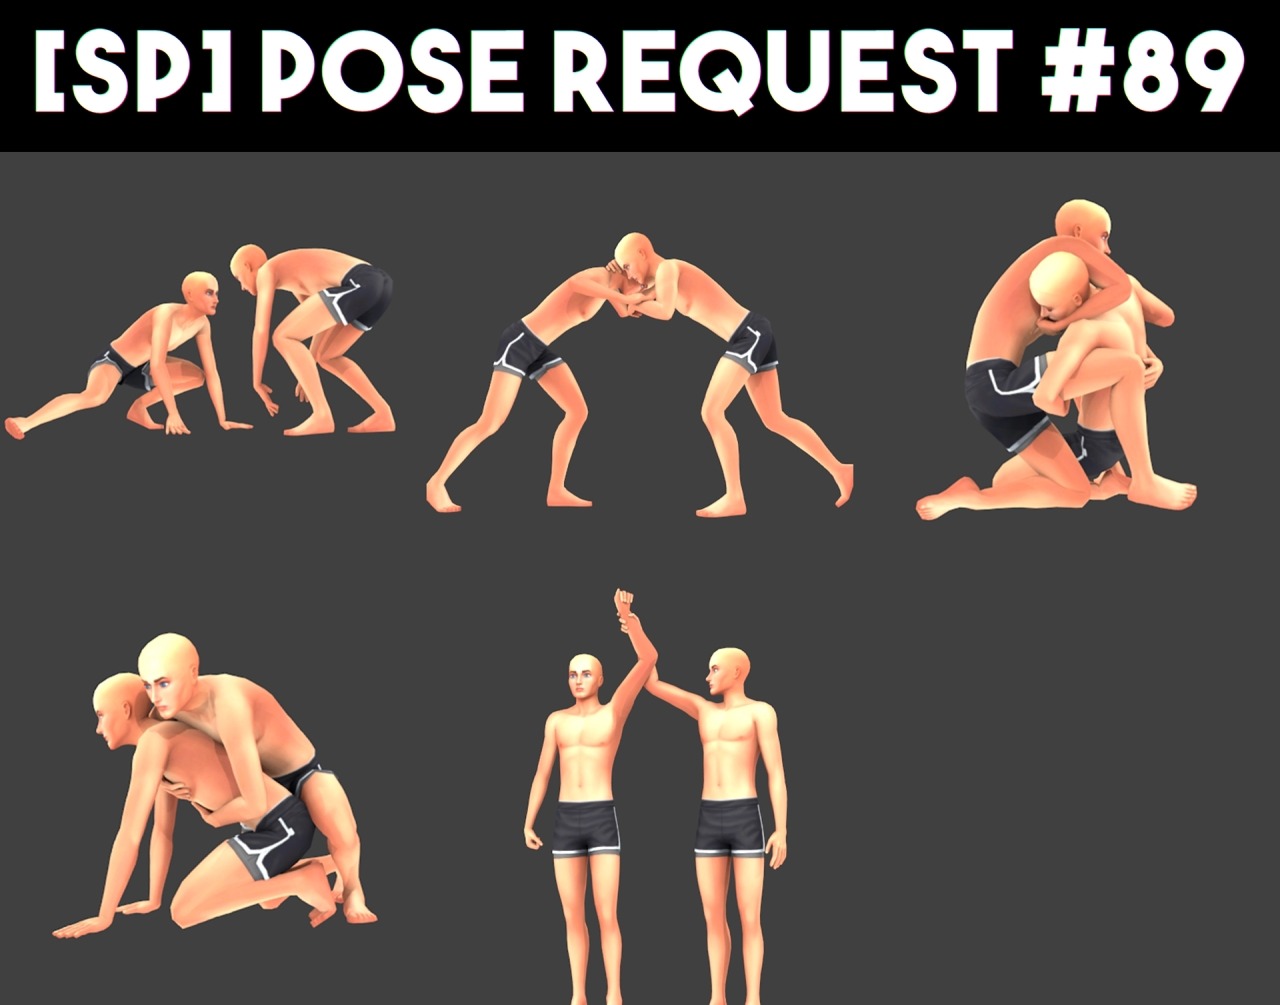 Complete with human fight public shake. SP pose. SIMS 4 Wrestling poses. [SP]pose request #89.